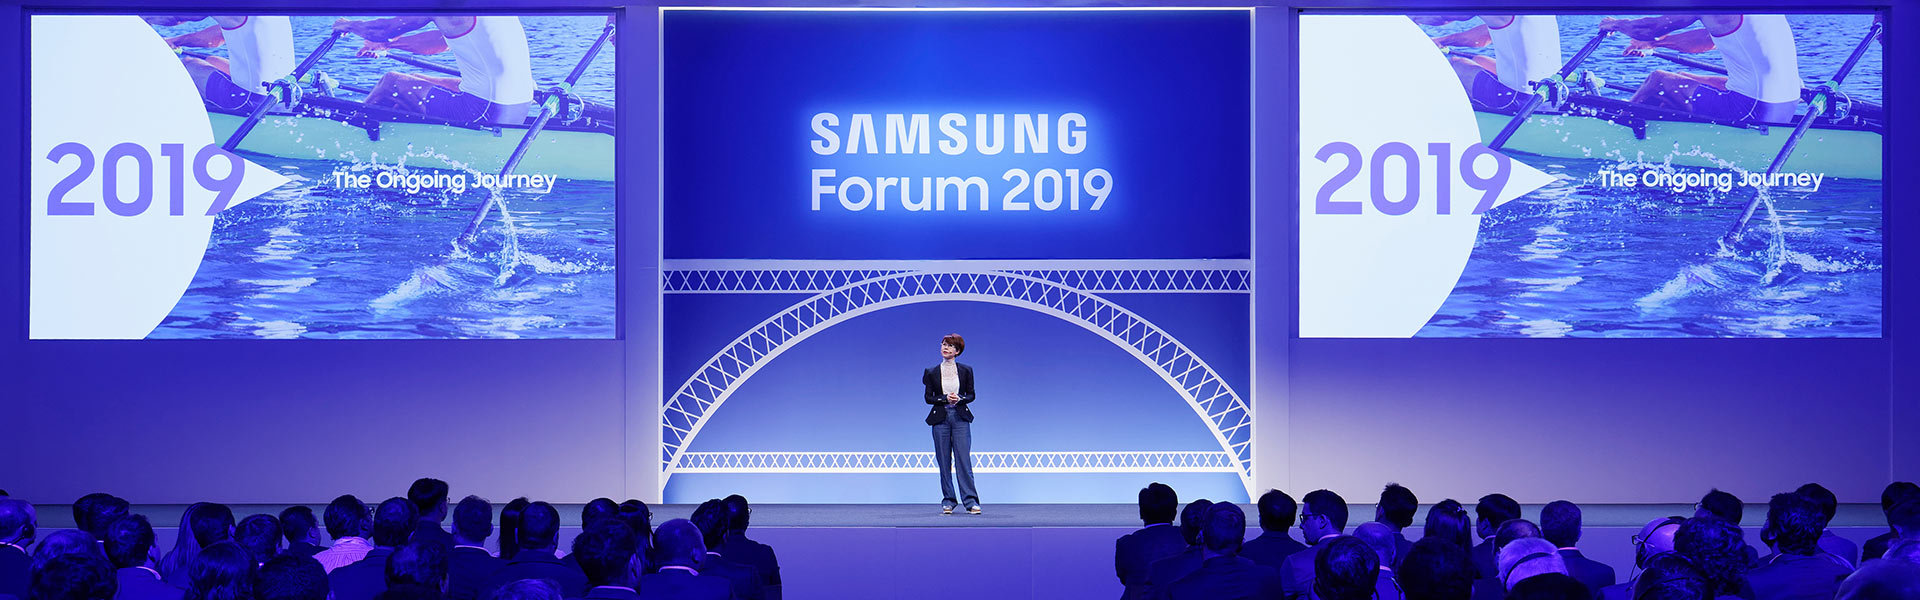 Samsung European Forum 2019 The Ongoing Journey